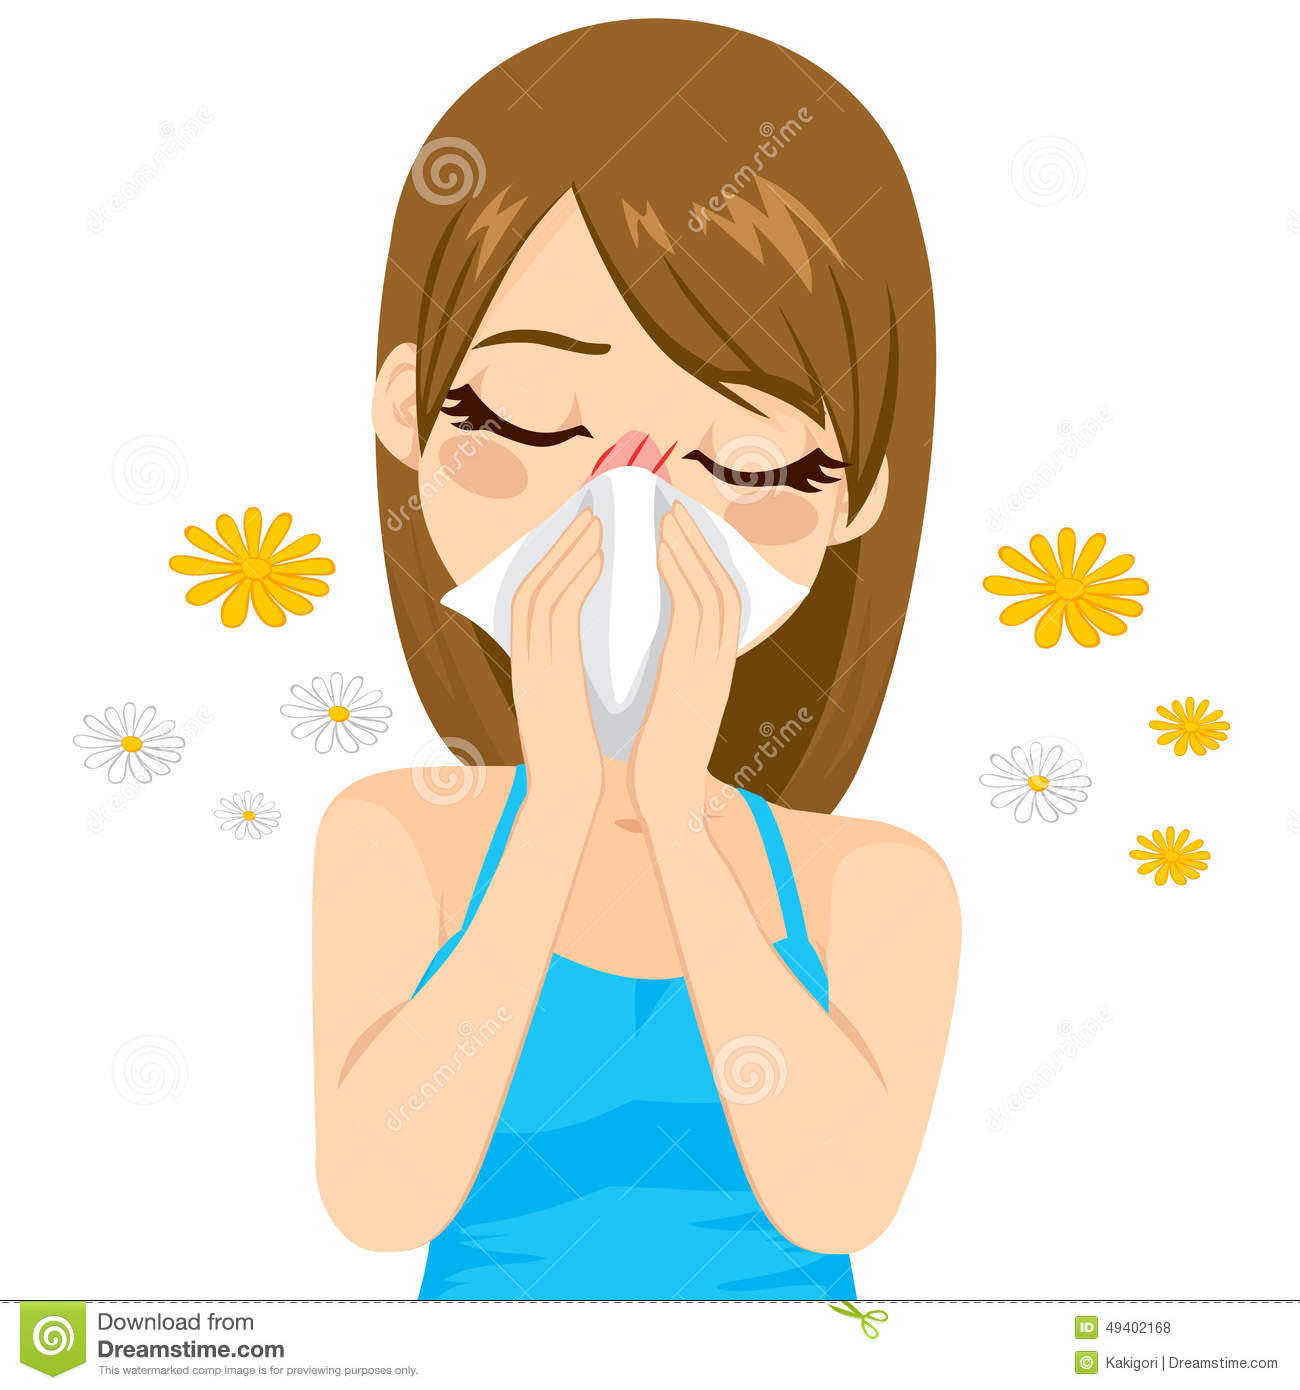 Allergies clipart - Clipground1300 x 1390